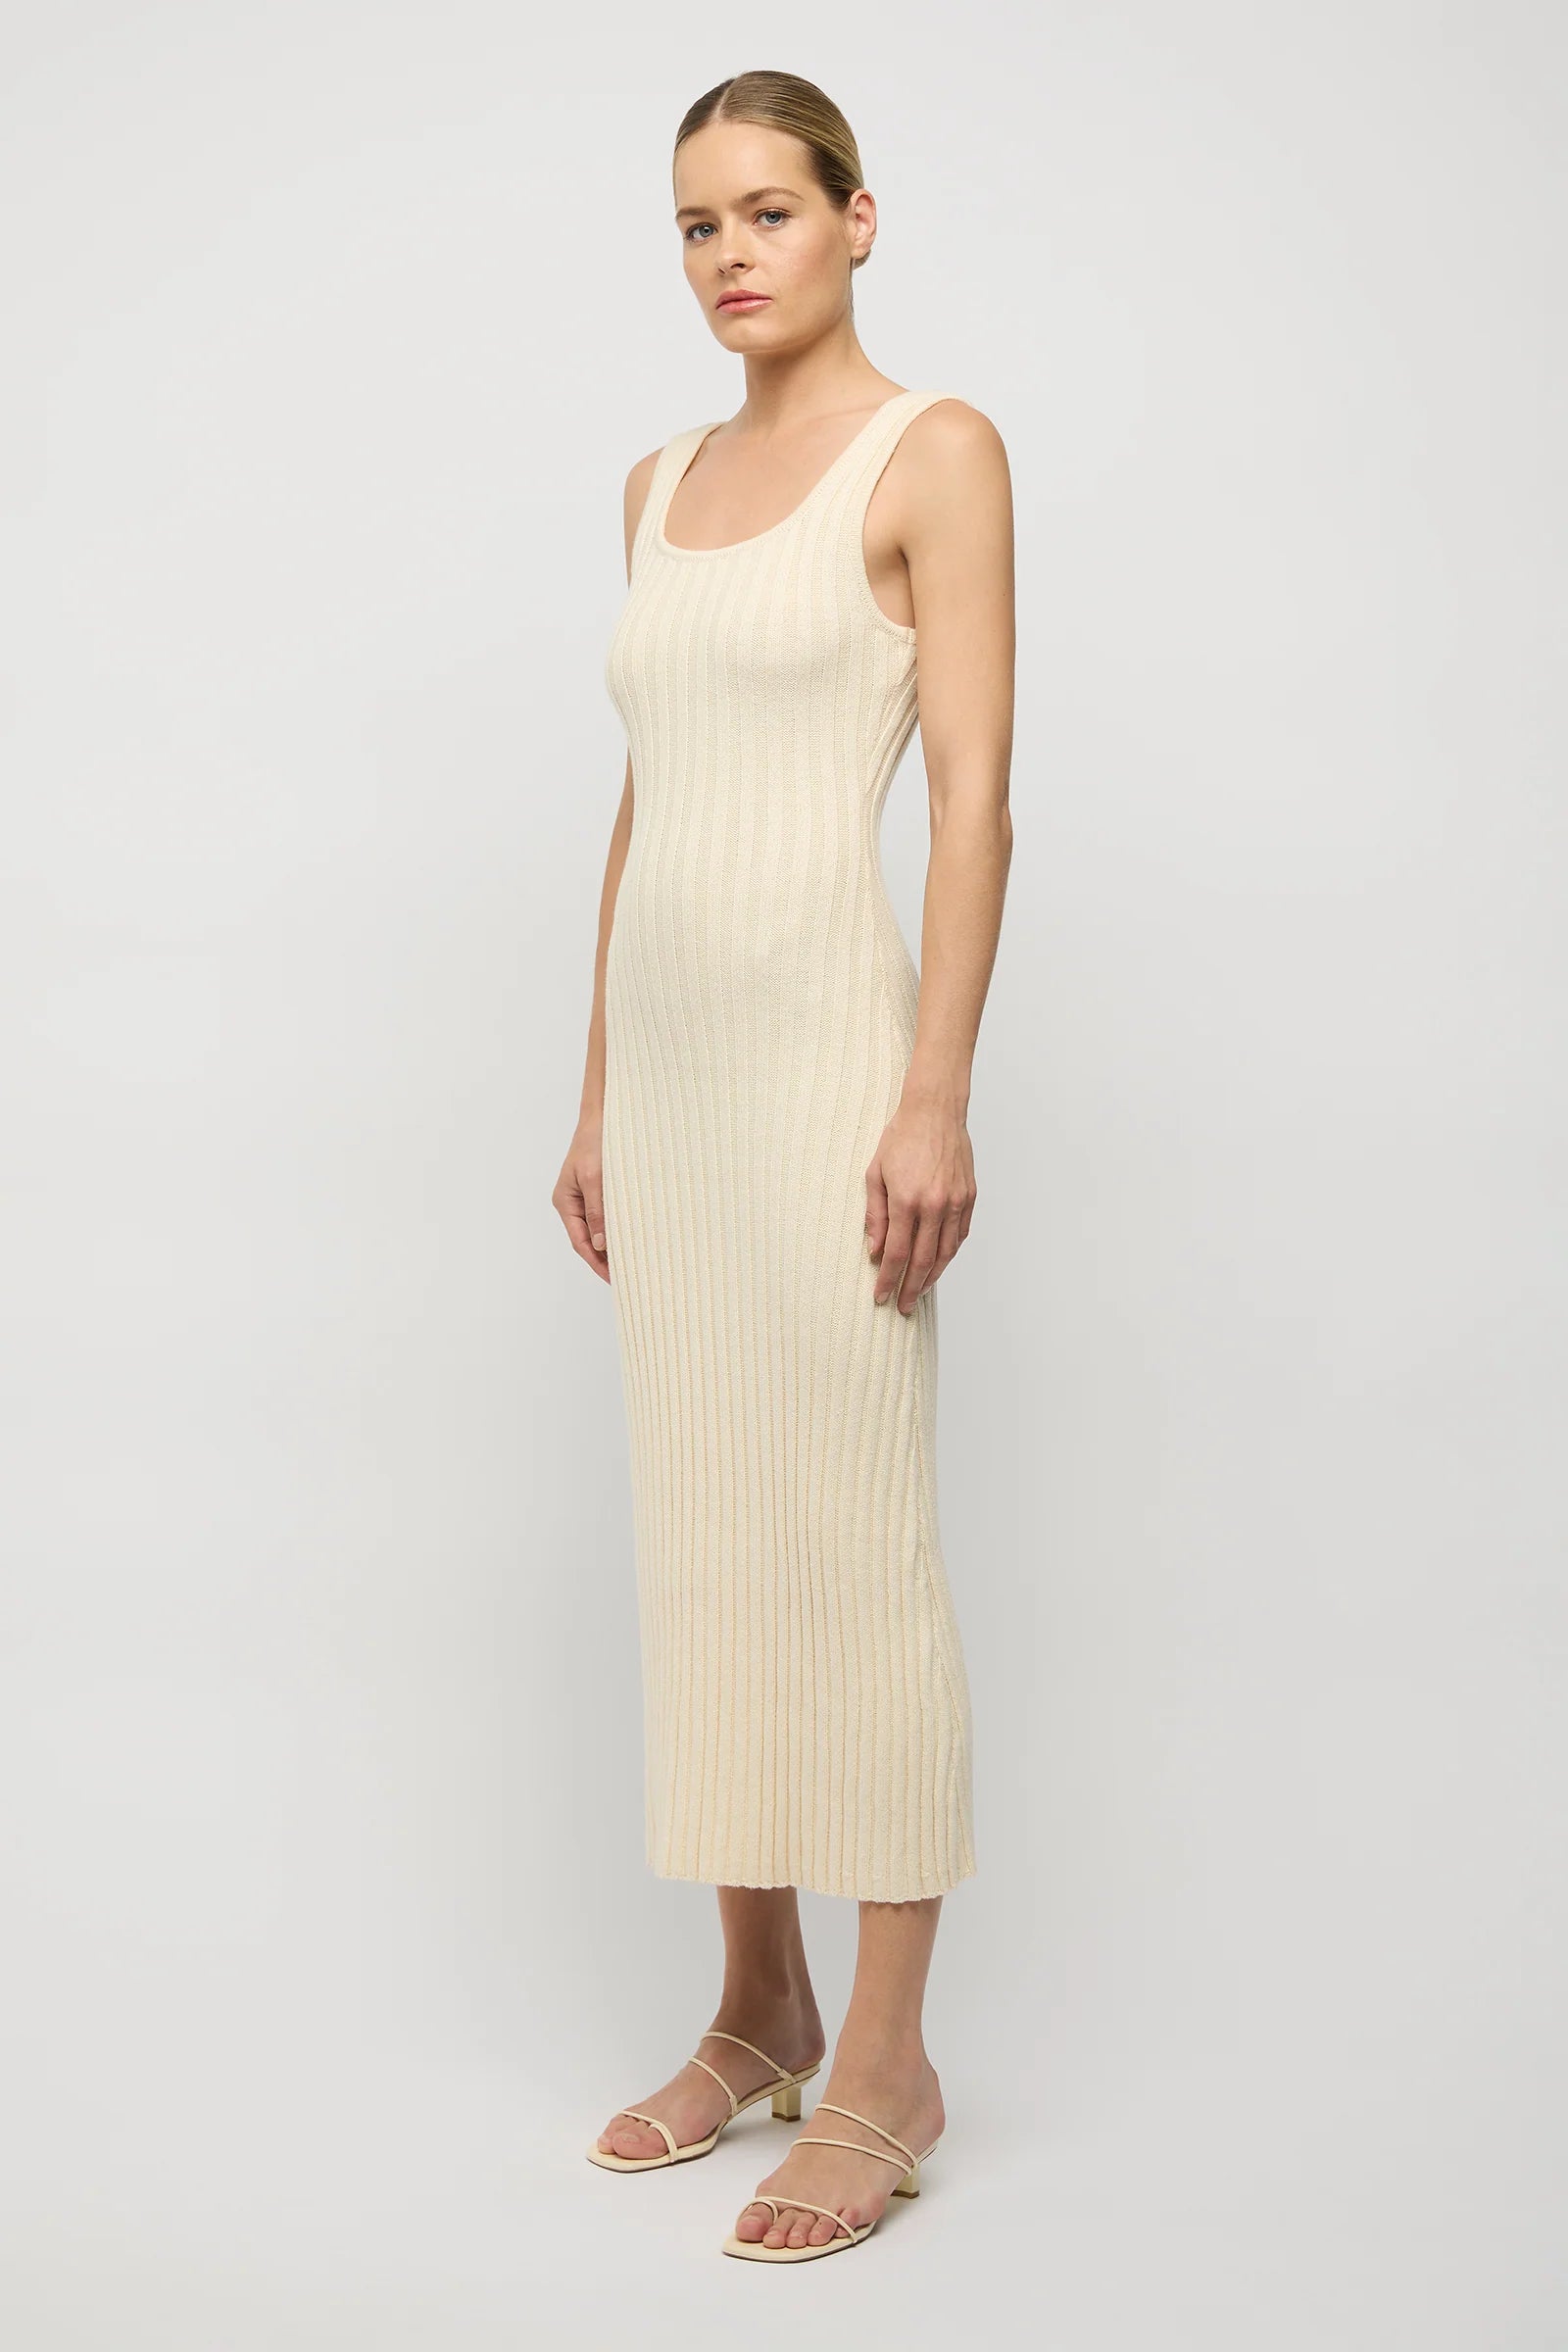 Rowan Square Neck Cotton Knit Dress in Natural